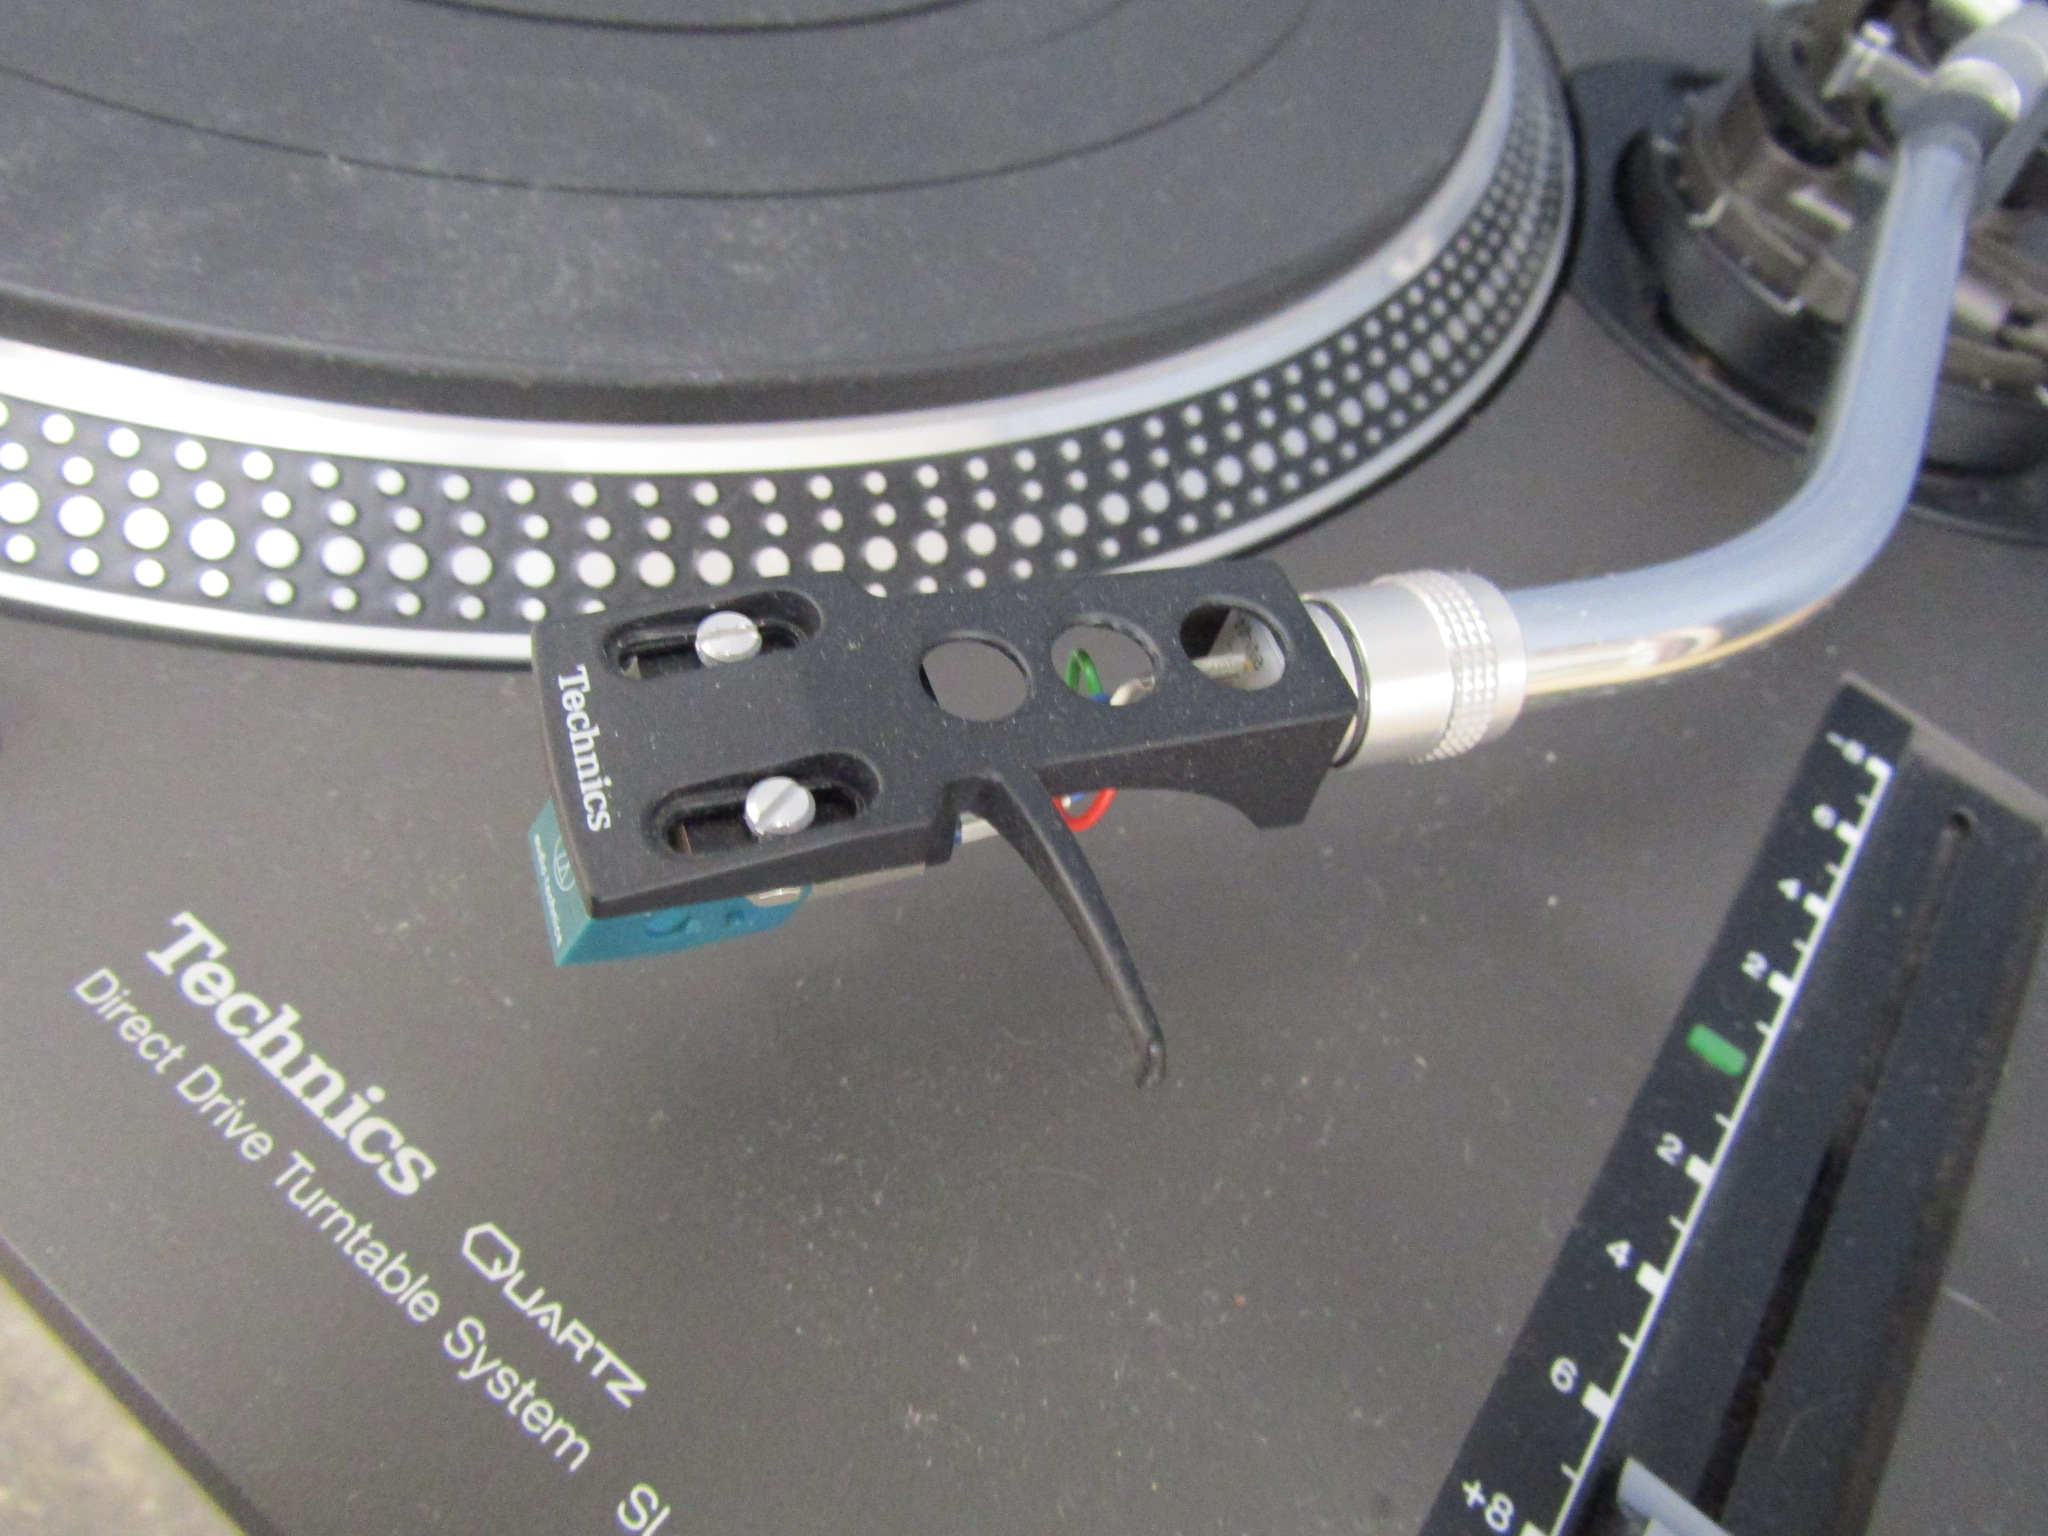 Technics Quartz SL-1210 MK2 direct drive turntable system with manual from a house clearance - Image 7 of 8